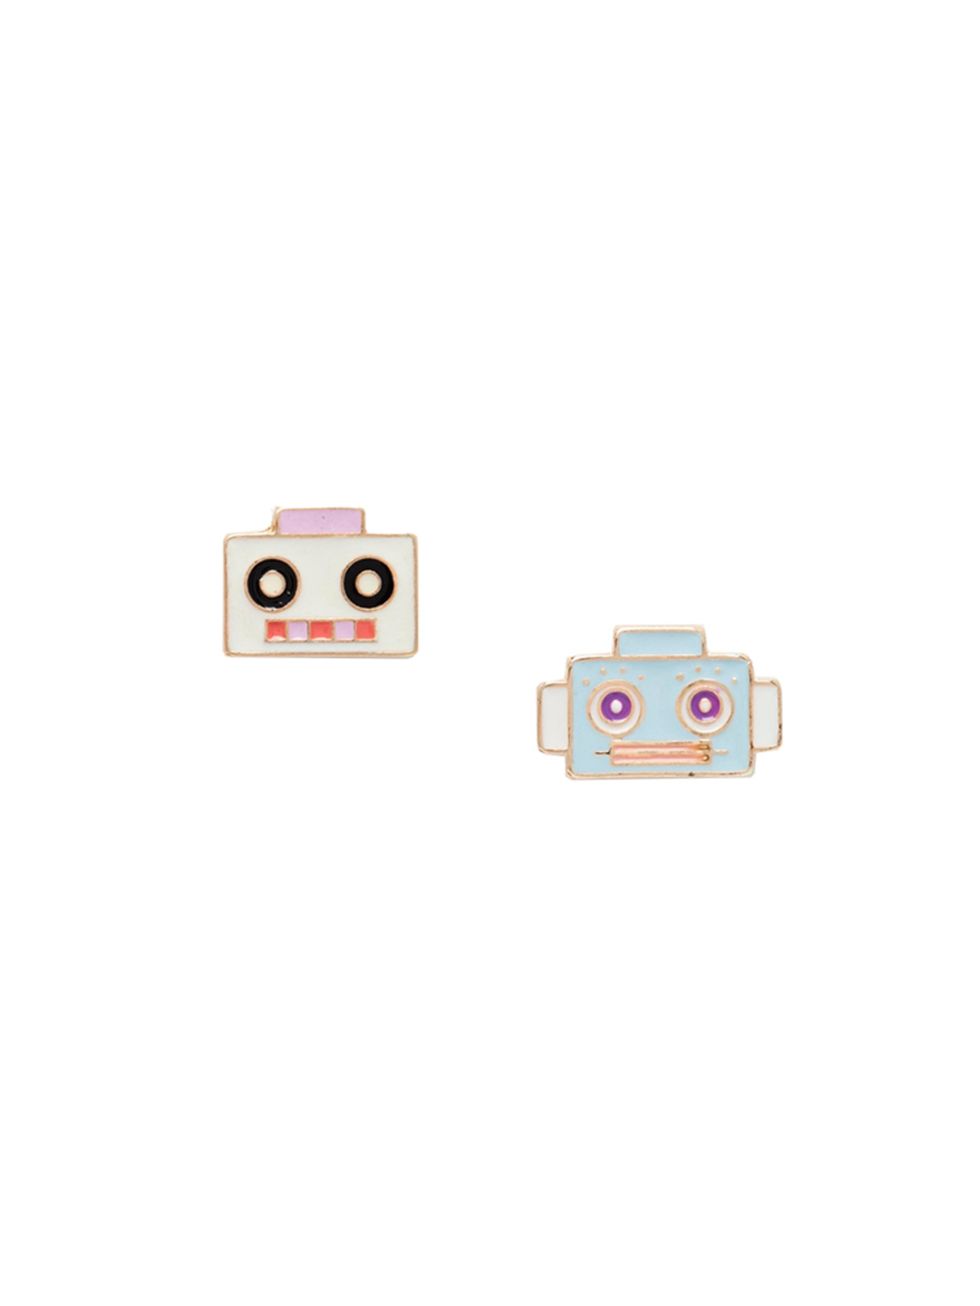 <p>Accessories Editor Donna Wallace is feeling playful today with these robot earrings. </p>

<p><a href="http://www.asos.com/ASOS/ASOS-Robot-Stud-Earrings/Prod/pgeproduct.aspx?iid=5078590&cid=6992&sh=0&pge=0&pgesize=36&sort=-1&clr=Multi&totalstyles=382&g